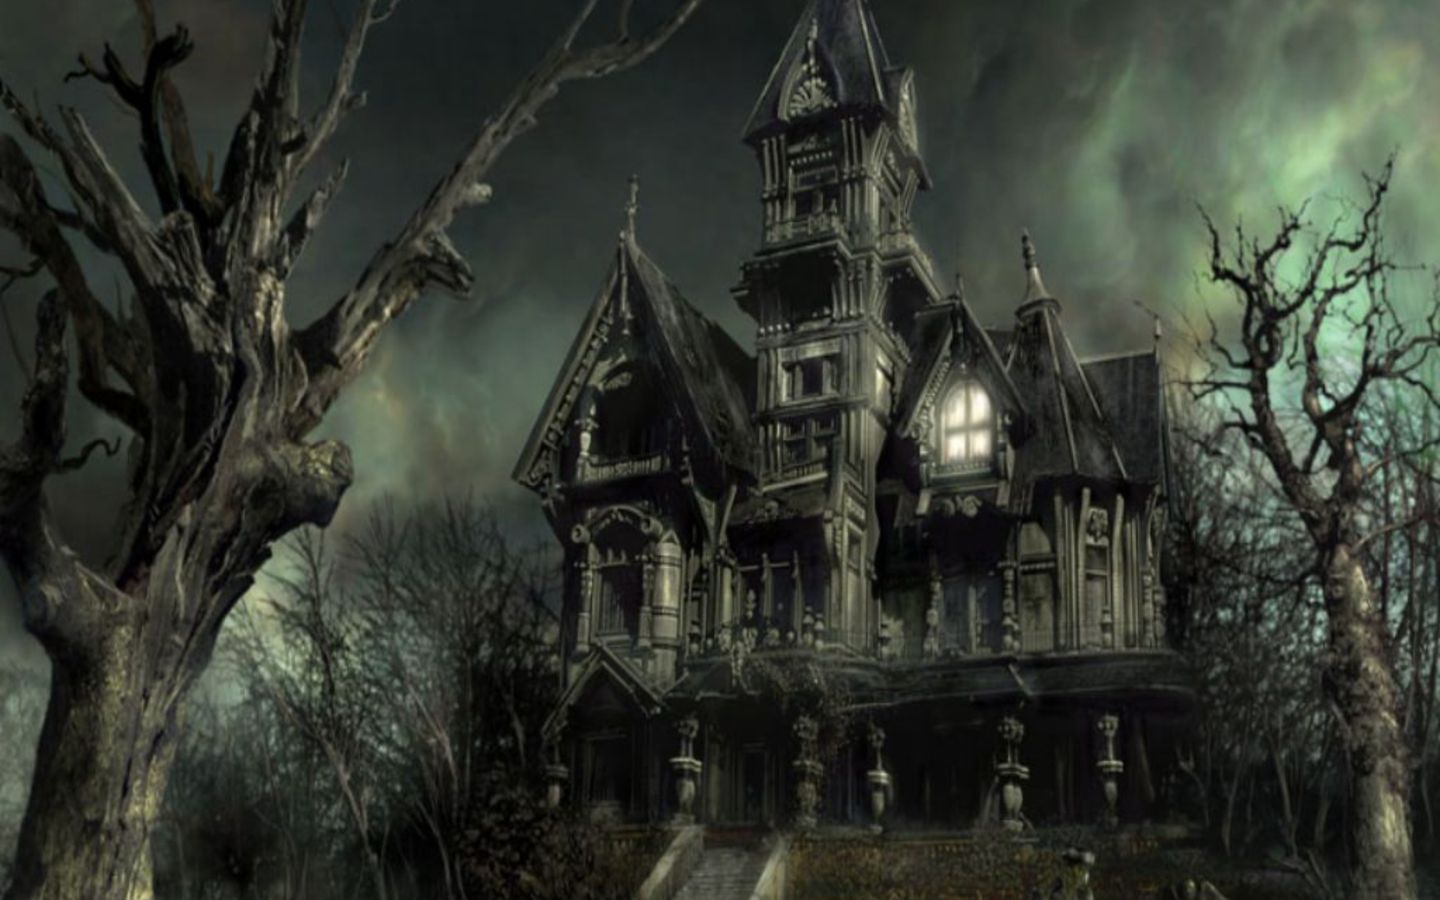 Horror Ghost Houses wallpapers HQ image size 1440x900 PIXHOME 1440x900